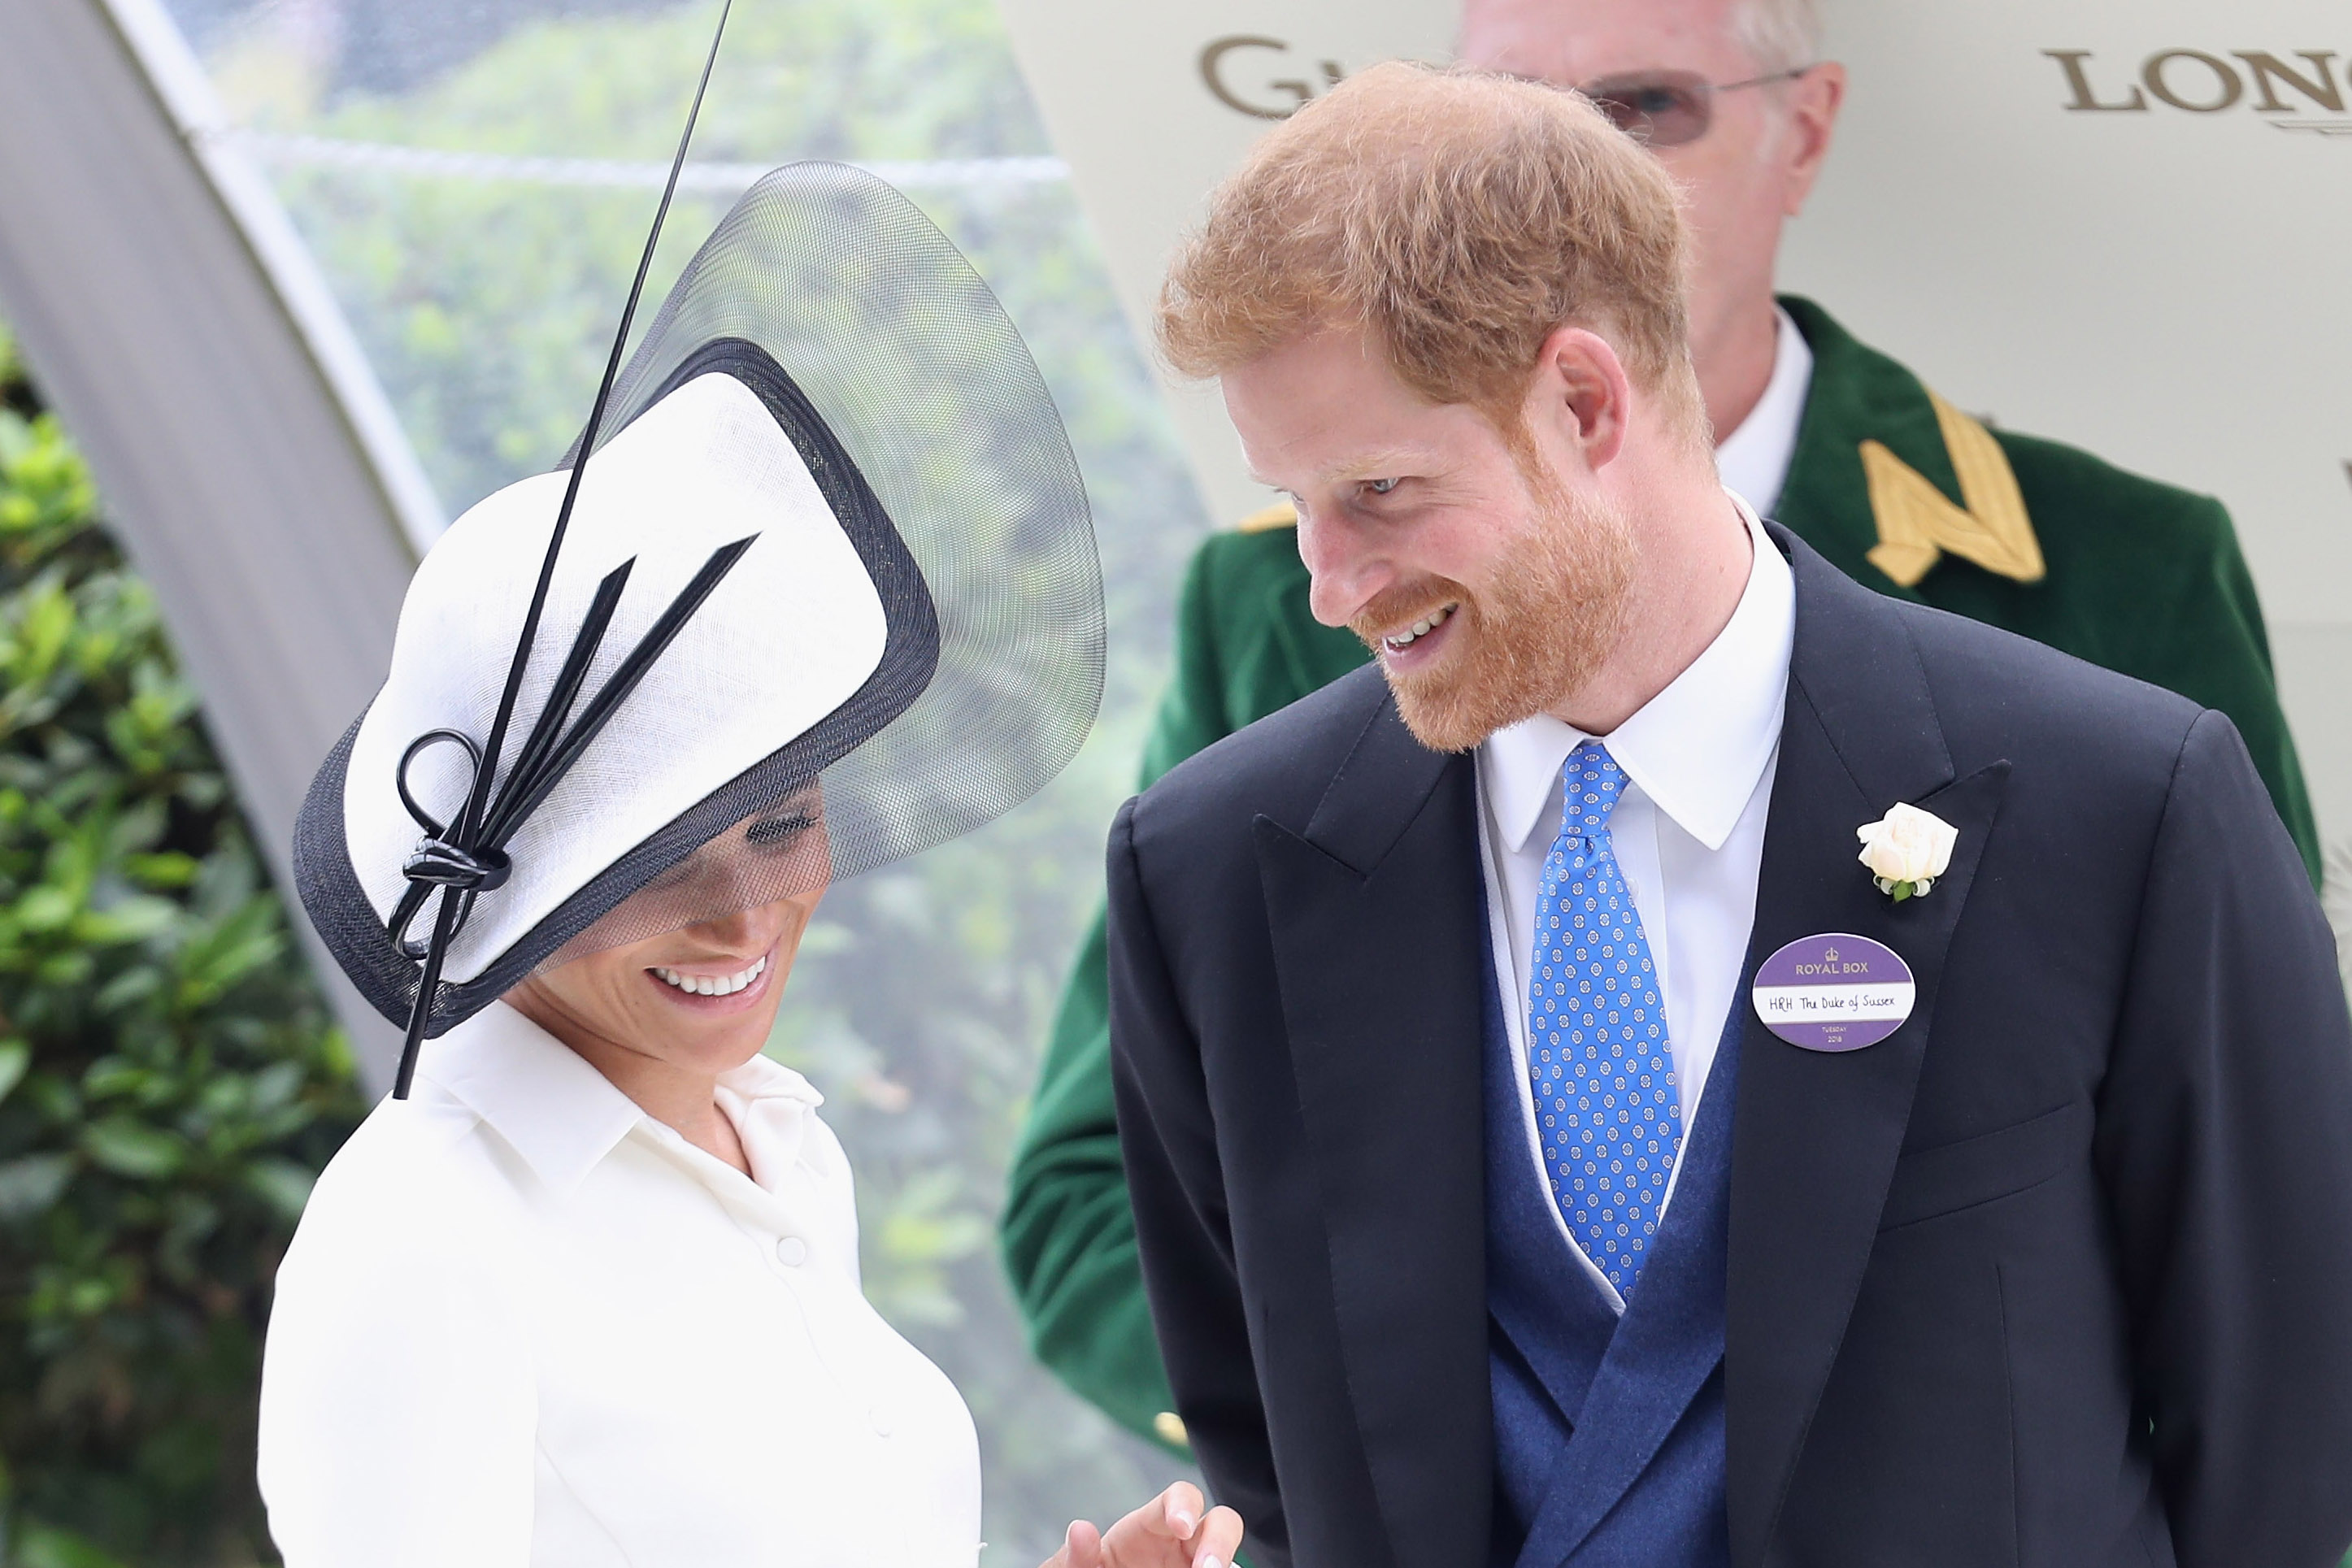  Meghan, Duchess of Sussex and Prince Harry, Duke of Sussex attend the prize ceremony of Royal Ascot Day 1 at Ascot Racecourse on June 19, 2018 in Ascot, United Kingdom. (Photo by Chris Jackson/Getty Images)